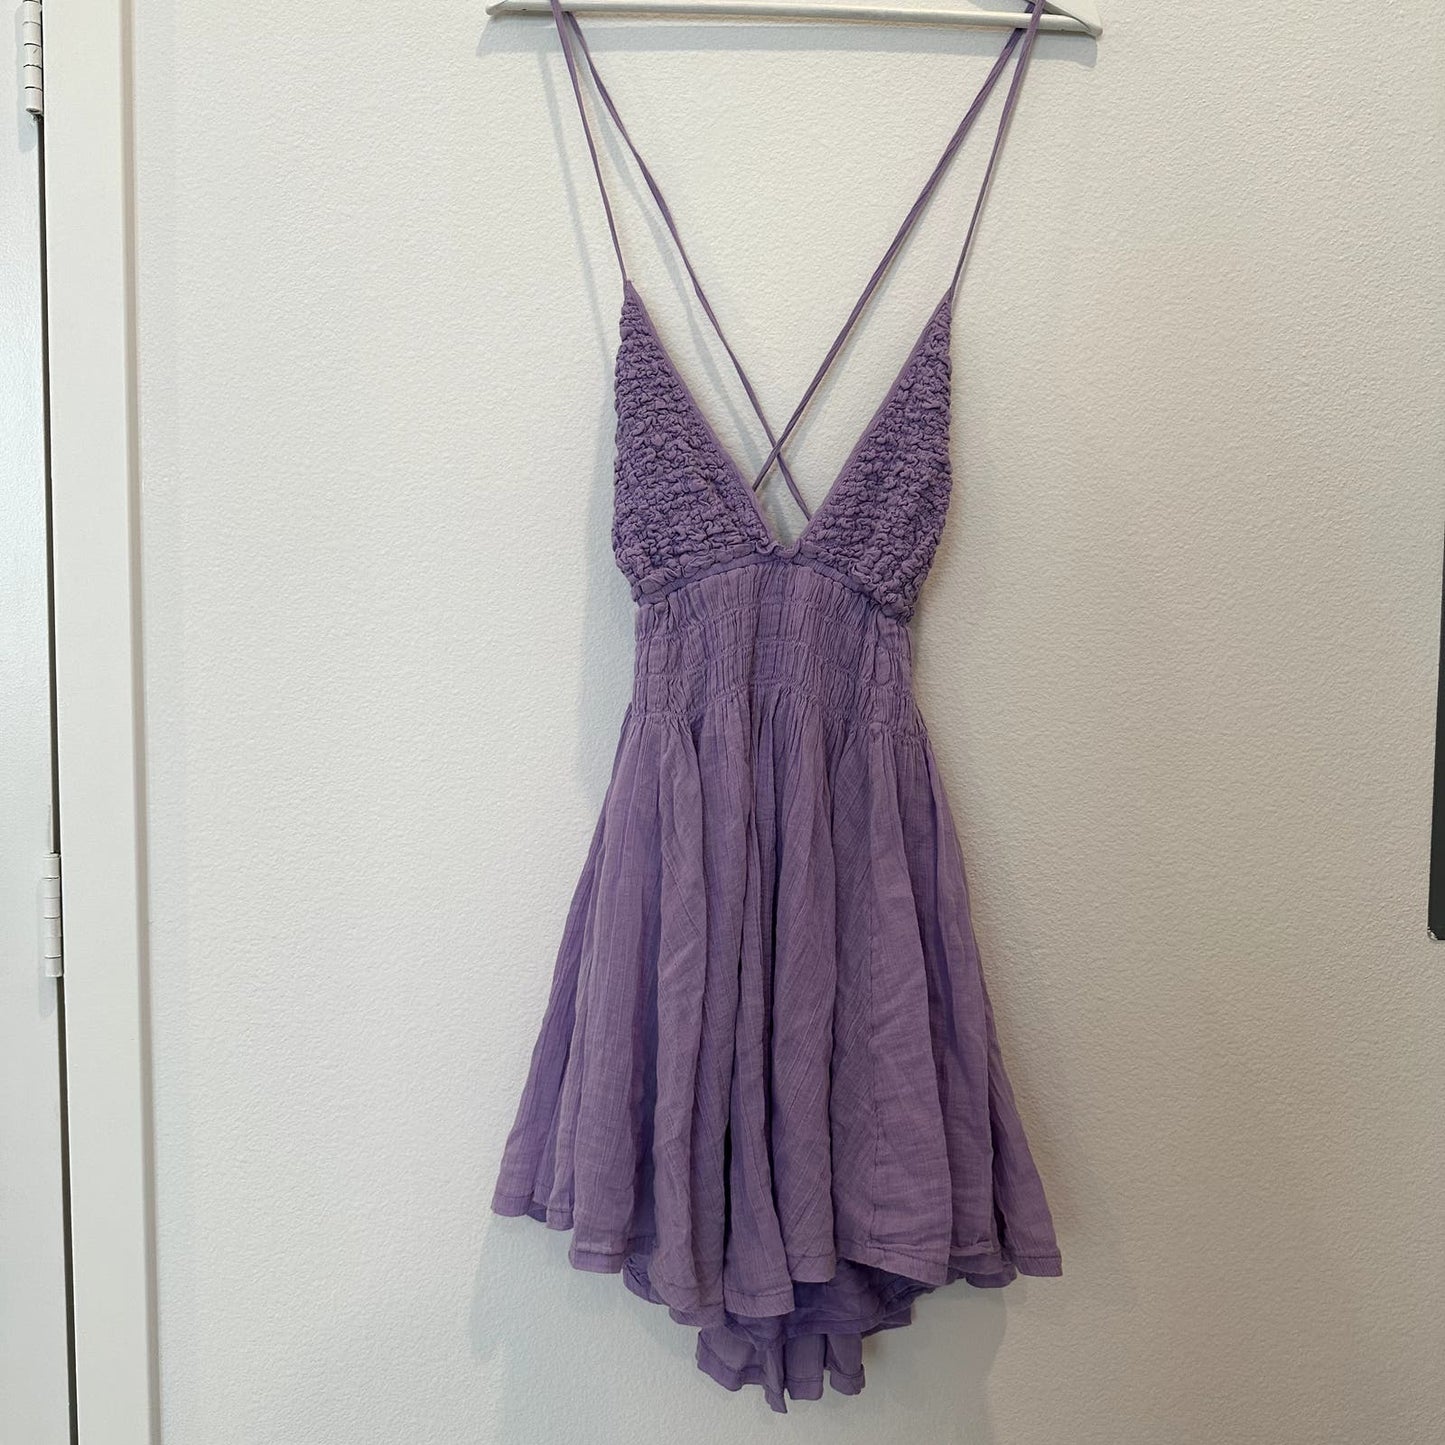 Free People Forever Favorite Mini Dress Endless Summer Thistle Patch lavender dress